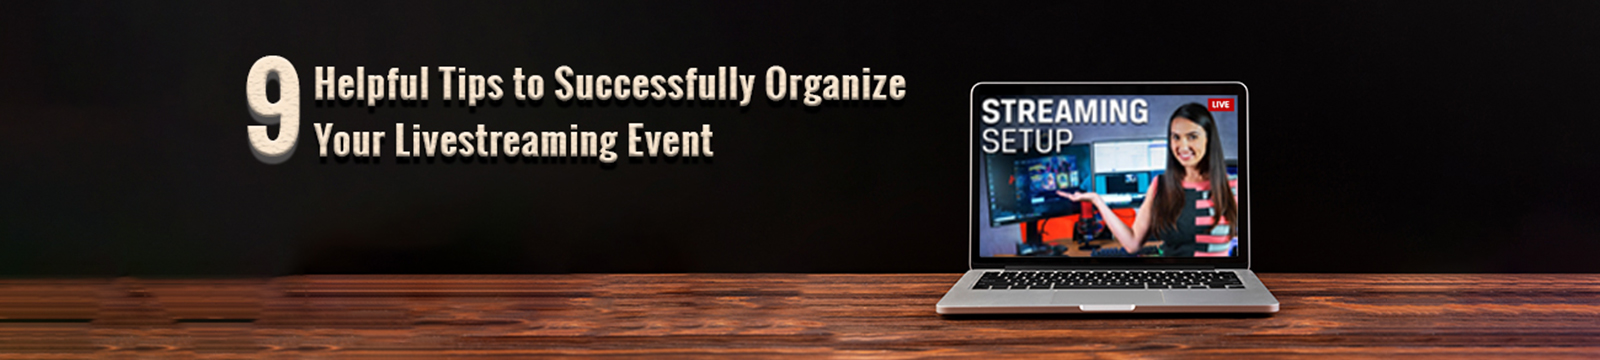 9 Helpful Tips to Successfully Organize Your Live Streaming Event